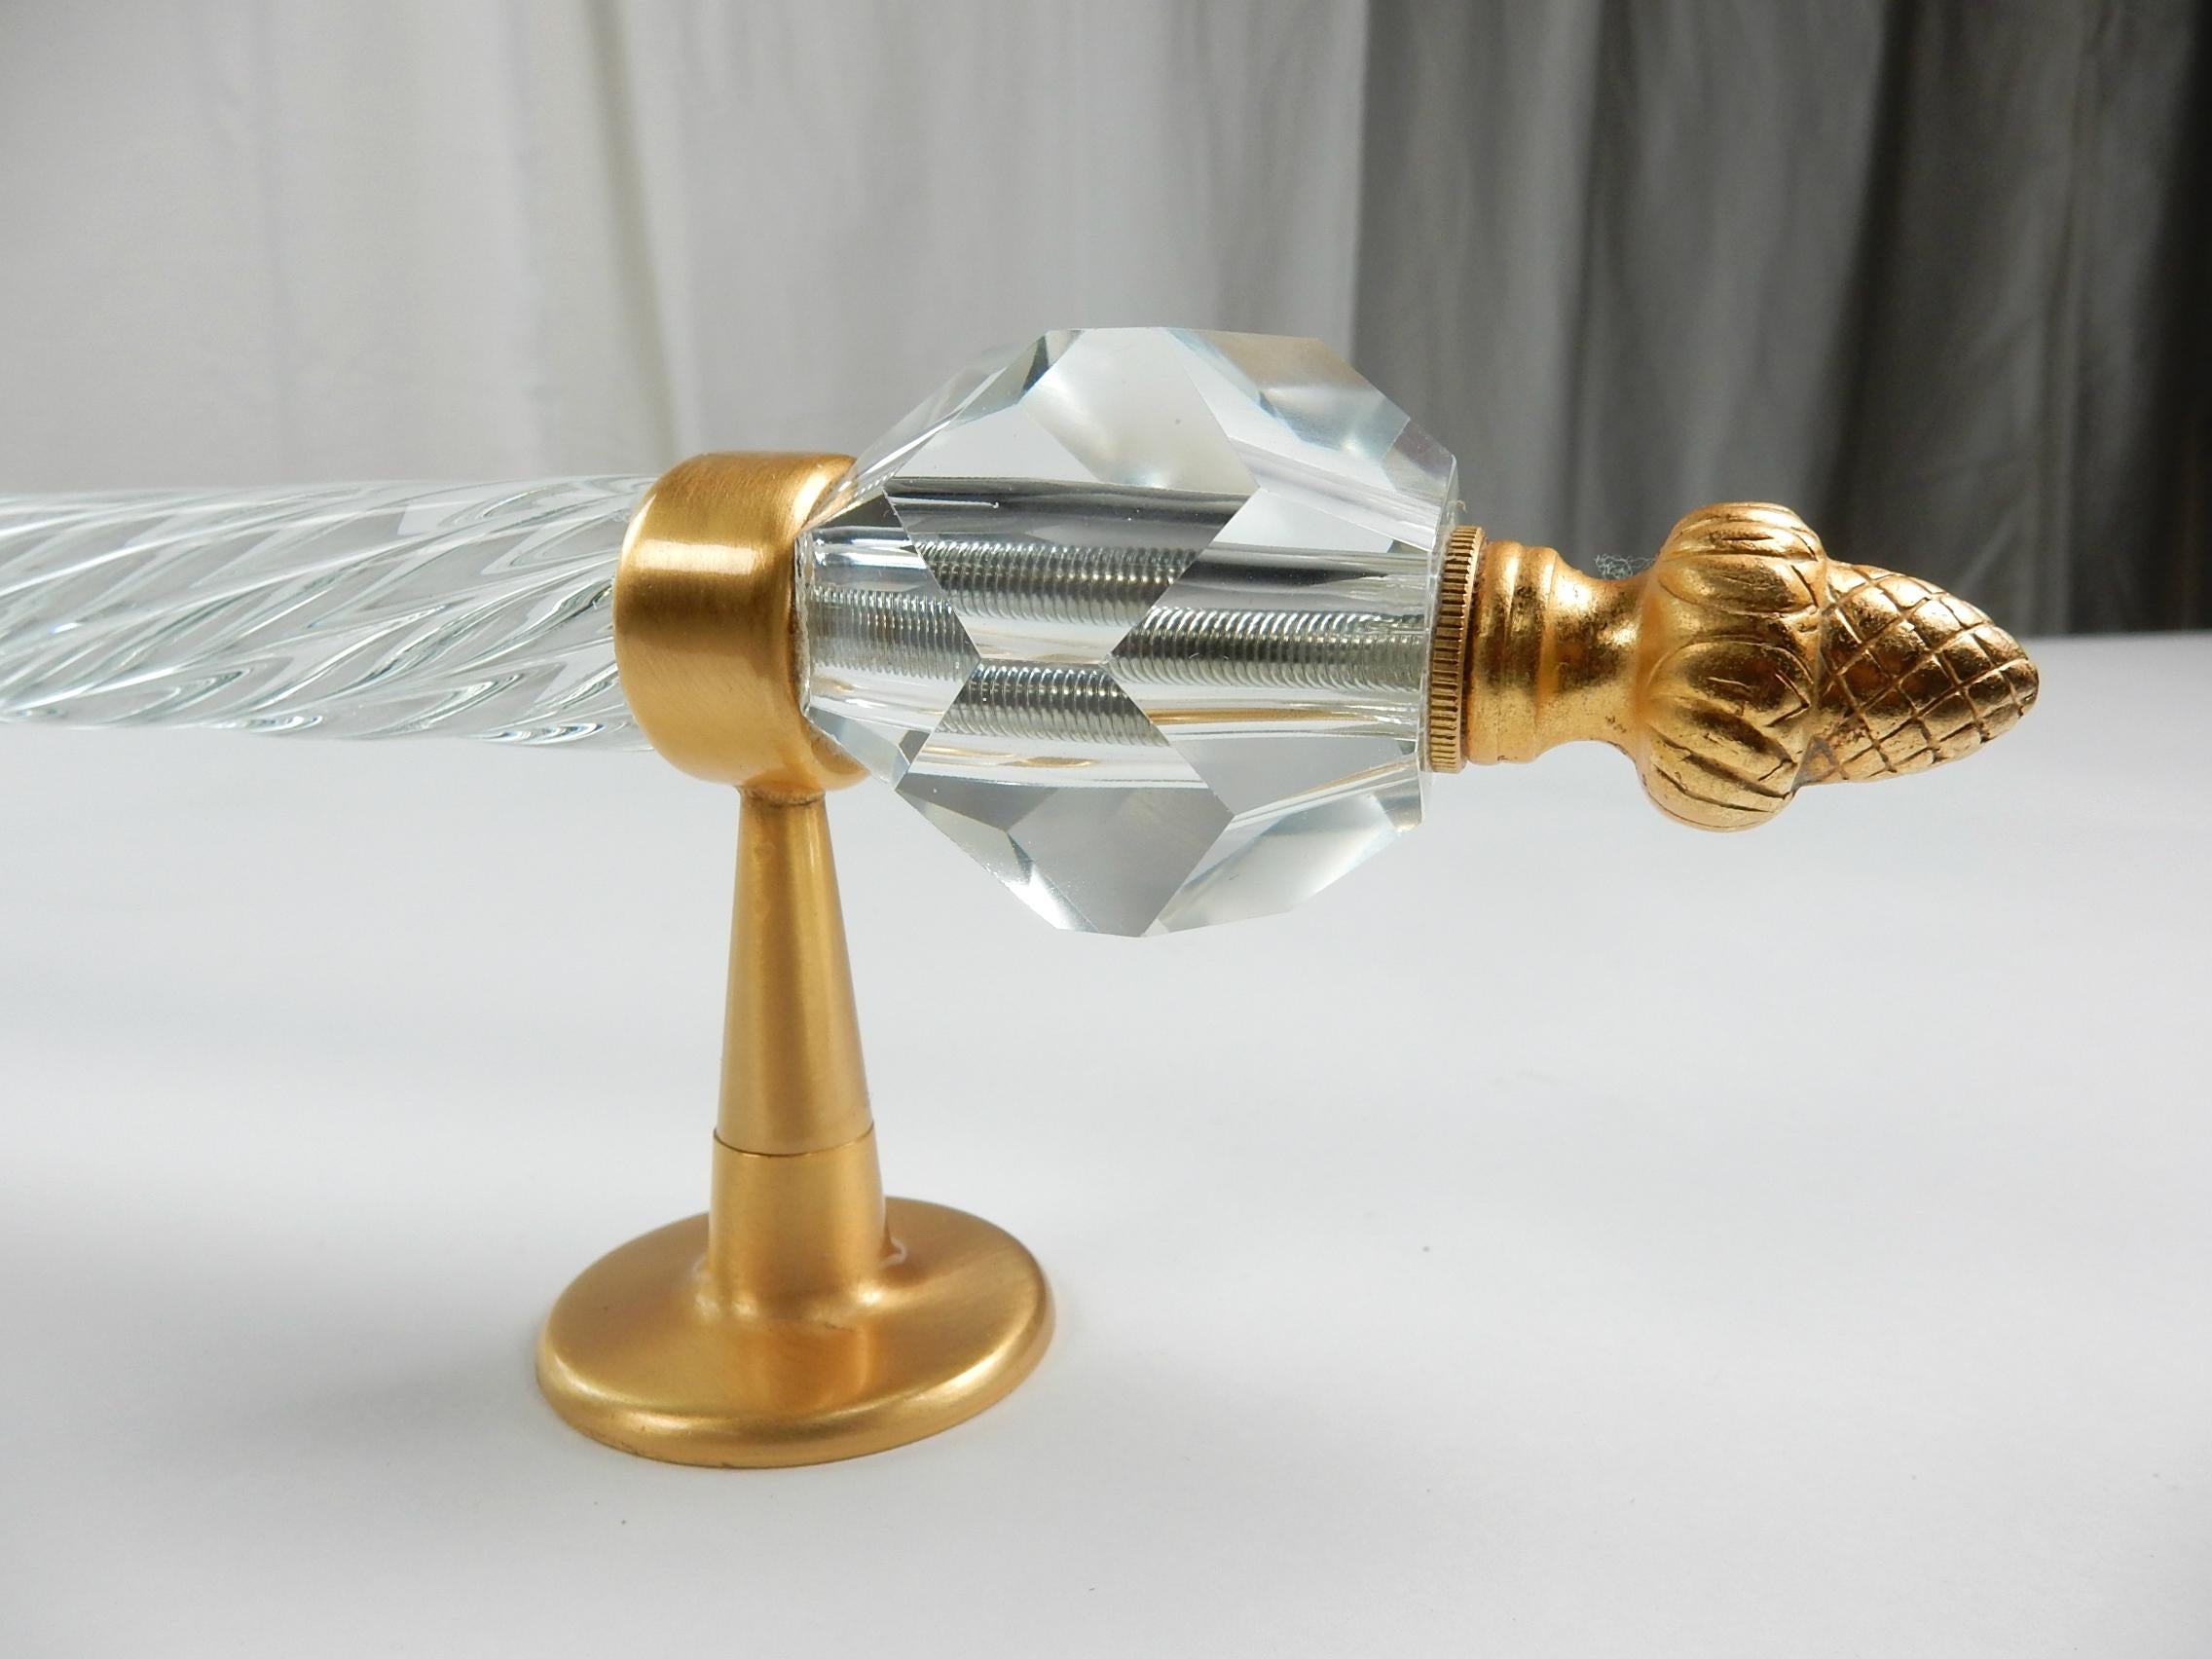 From the Sherle Wagner collection, this gorgeous spiral crystal glass towel bar
with large faceted crystal orbs at each end capped with ornate 22-karat gold plated finial and wall mounts.
31 inches in length, circa 1960s.